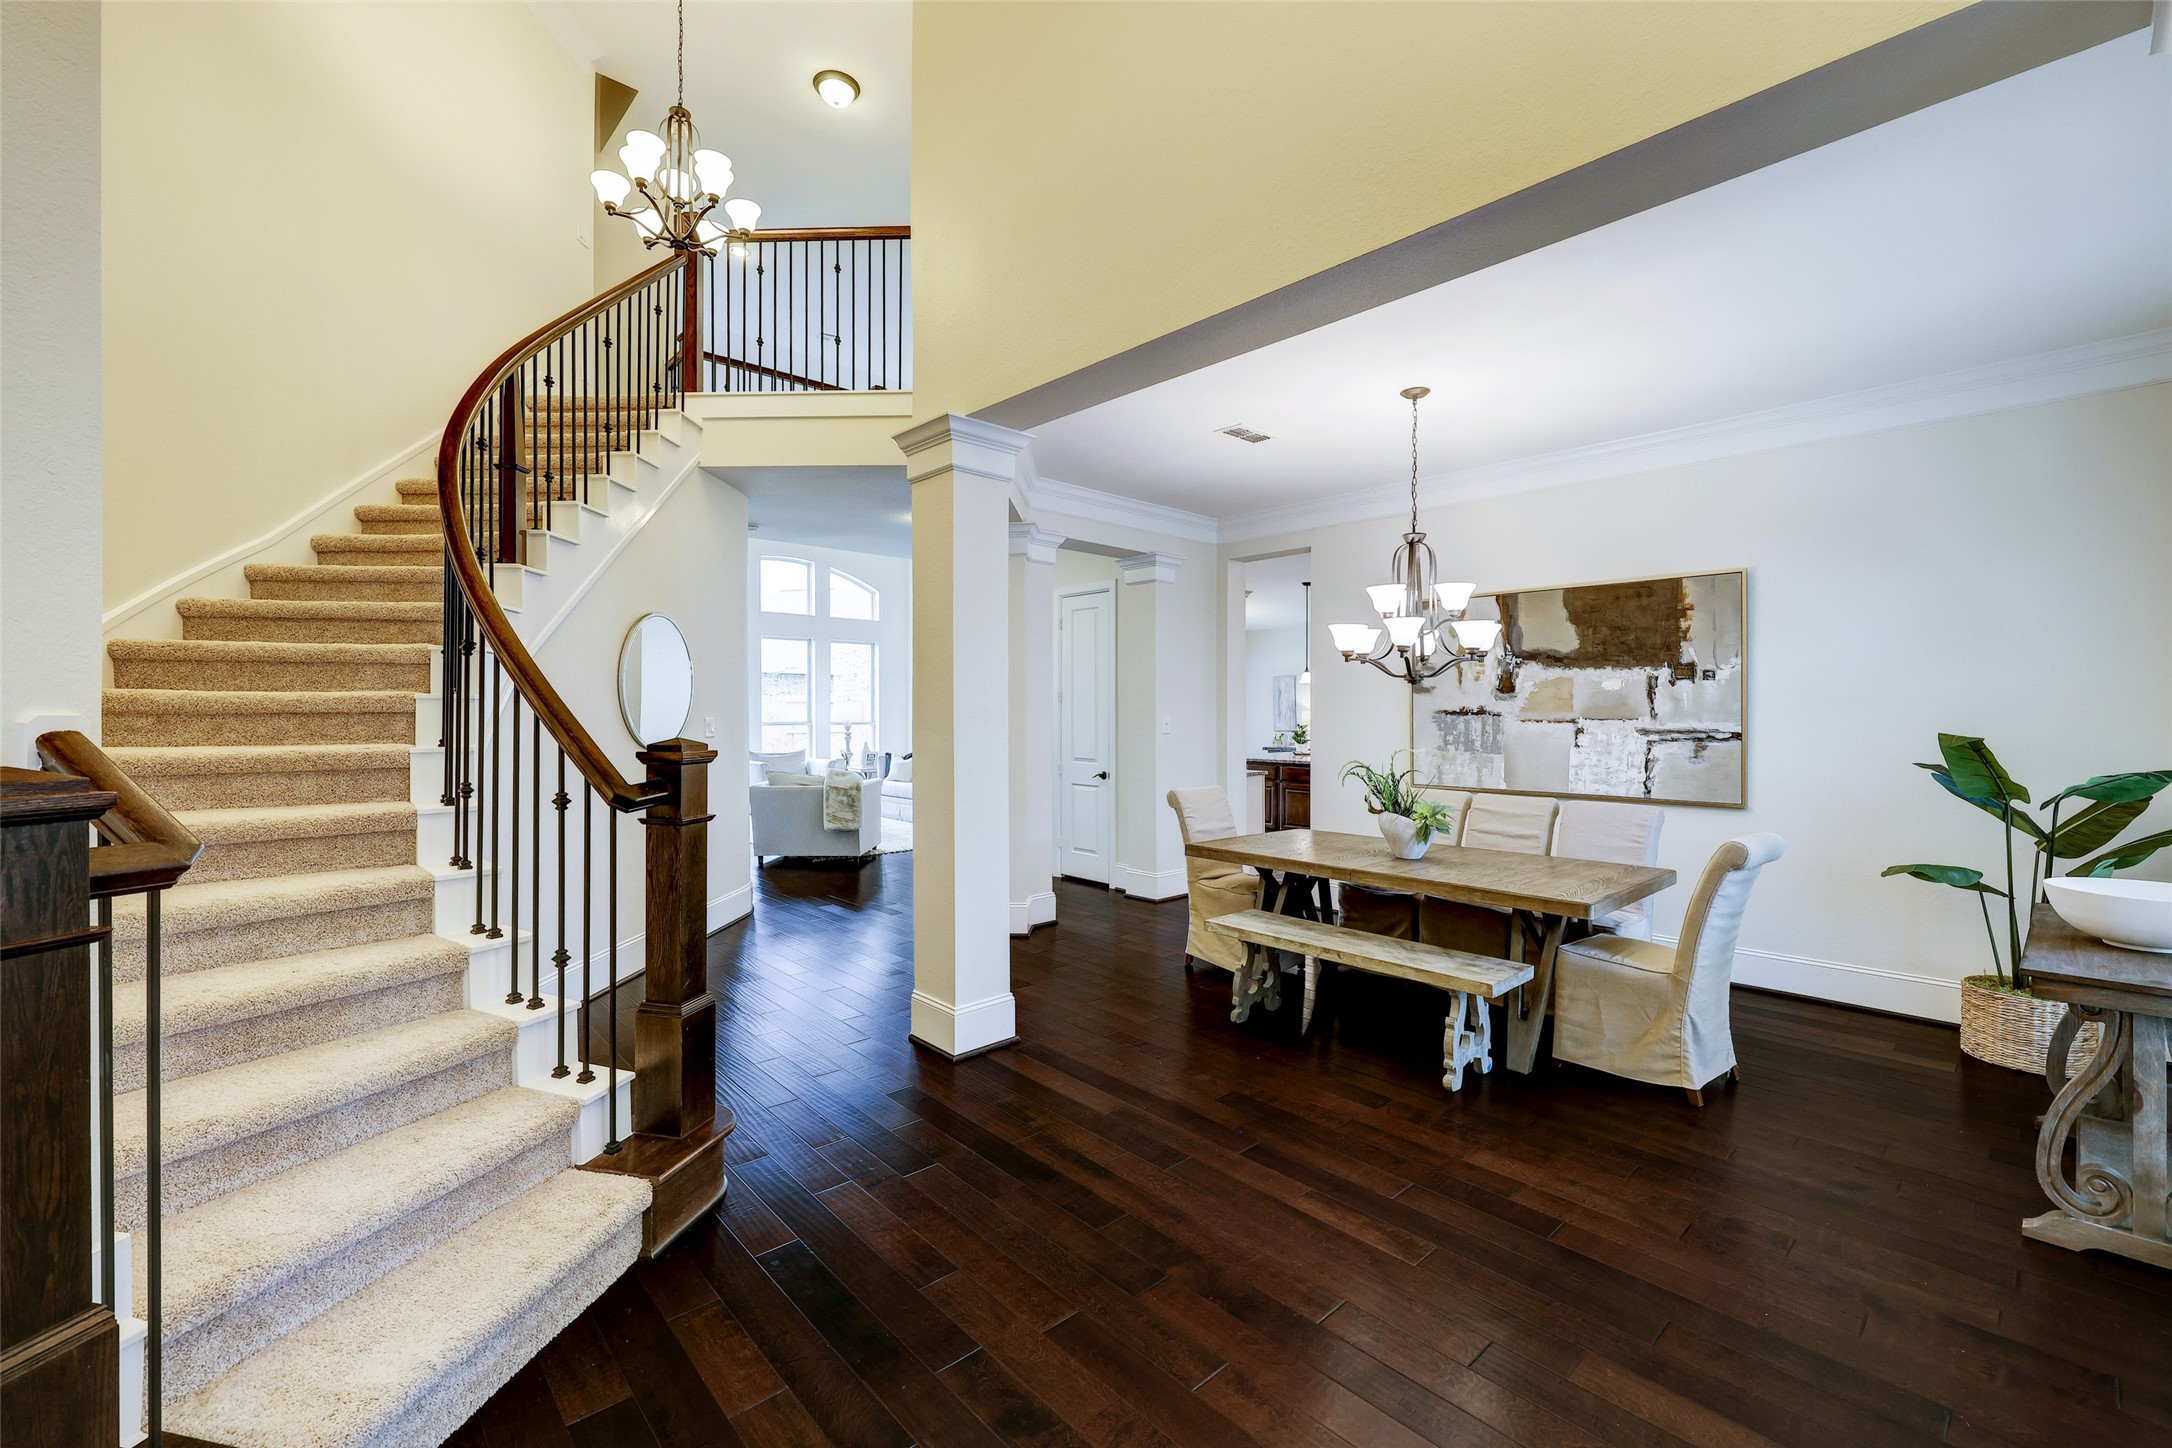 Elegance welcomes you home in the foyer, with rich wood floors and a freshly painted neutral palette guiding the way to a lifestyle of comfort and sophistication.